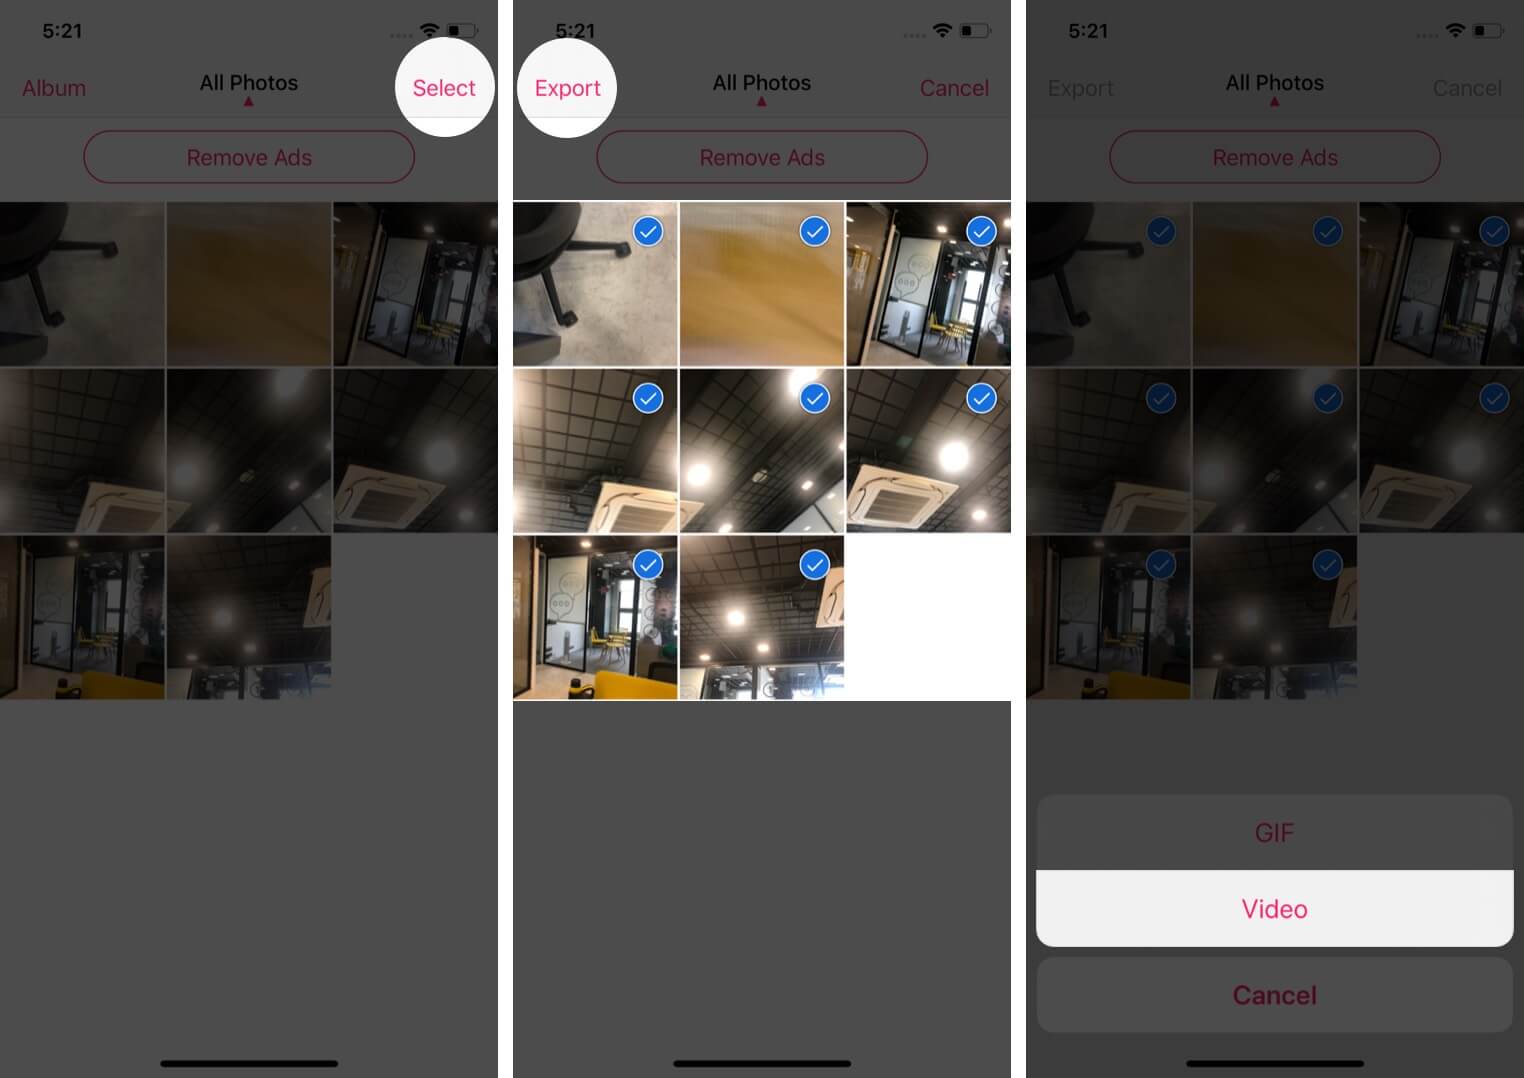 select photos tap on export and choose video to turn live photos into video using third-party app on iphone